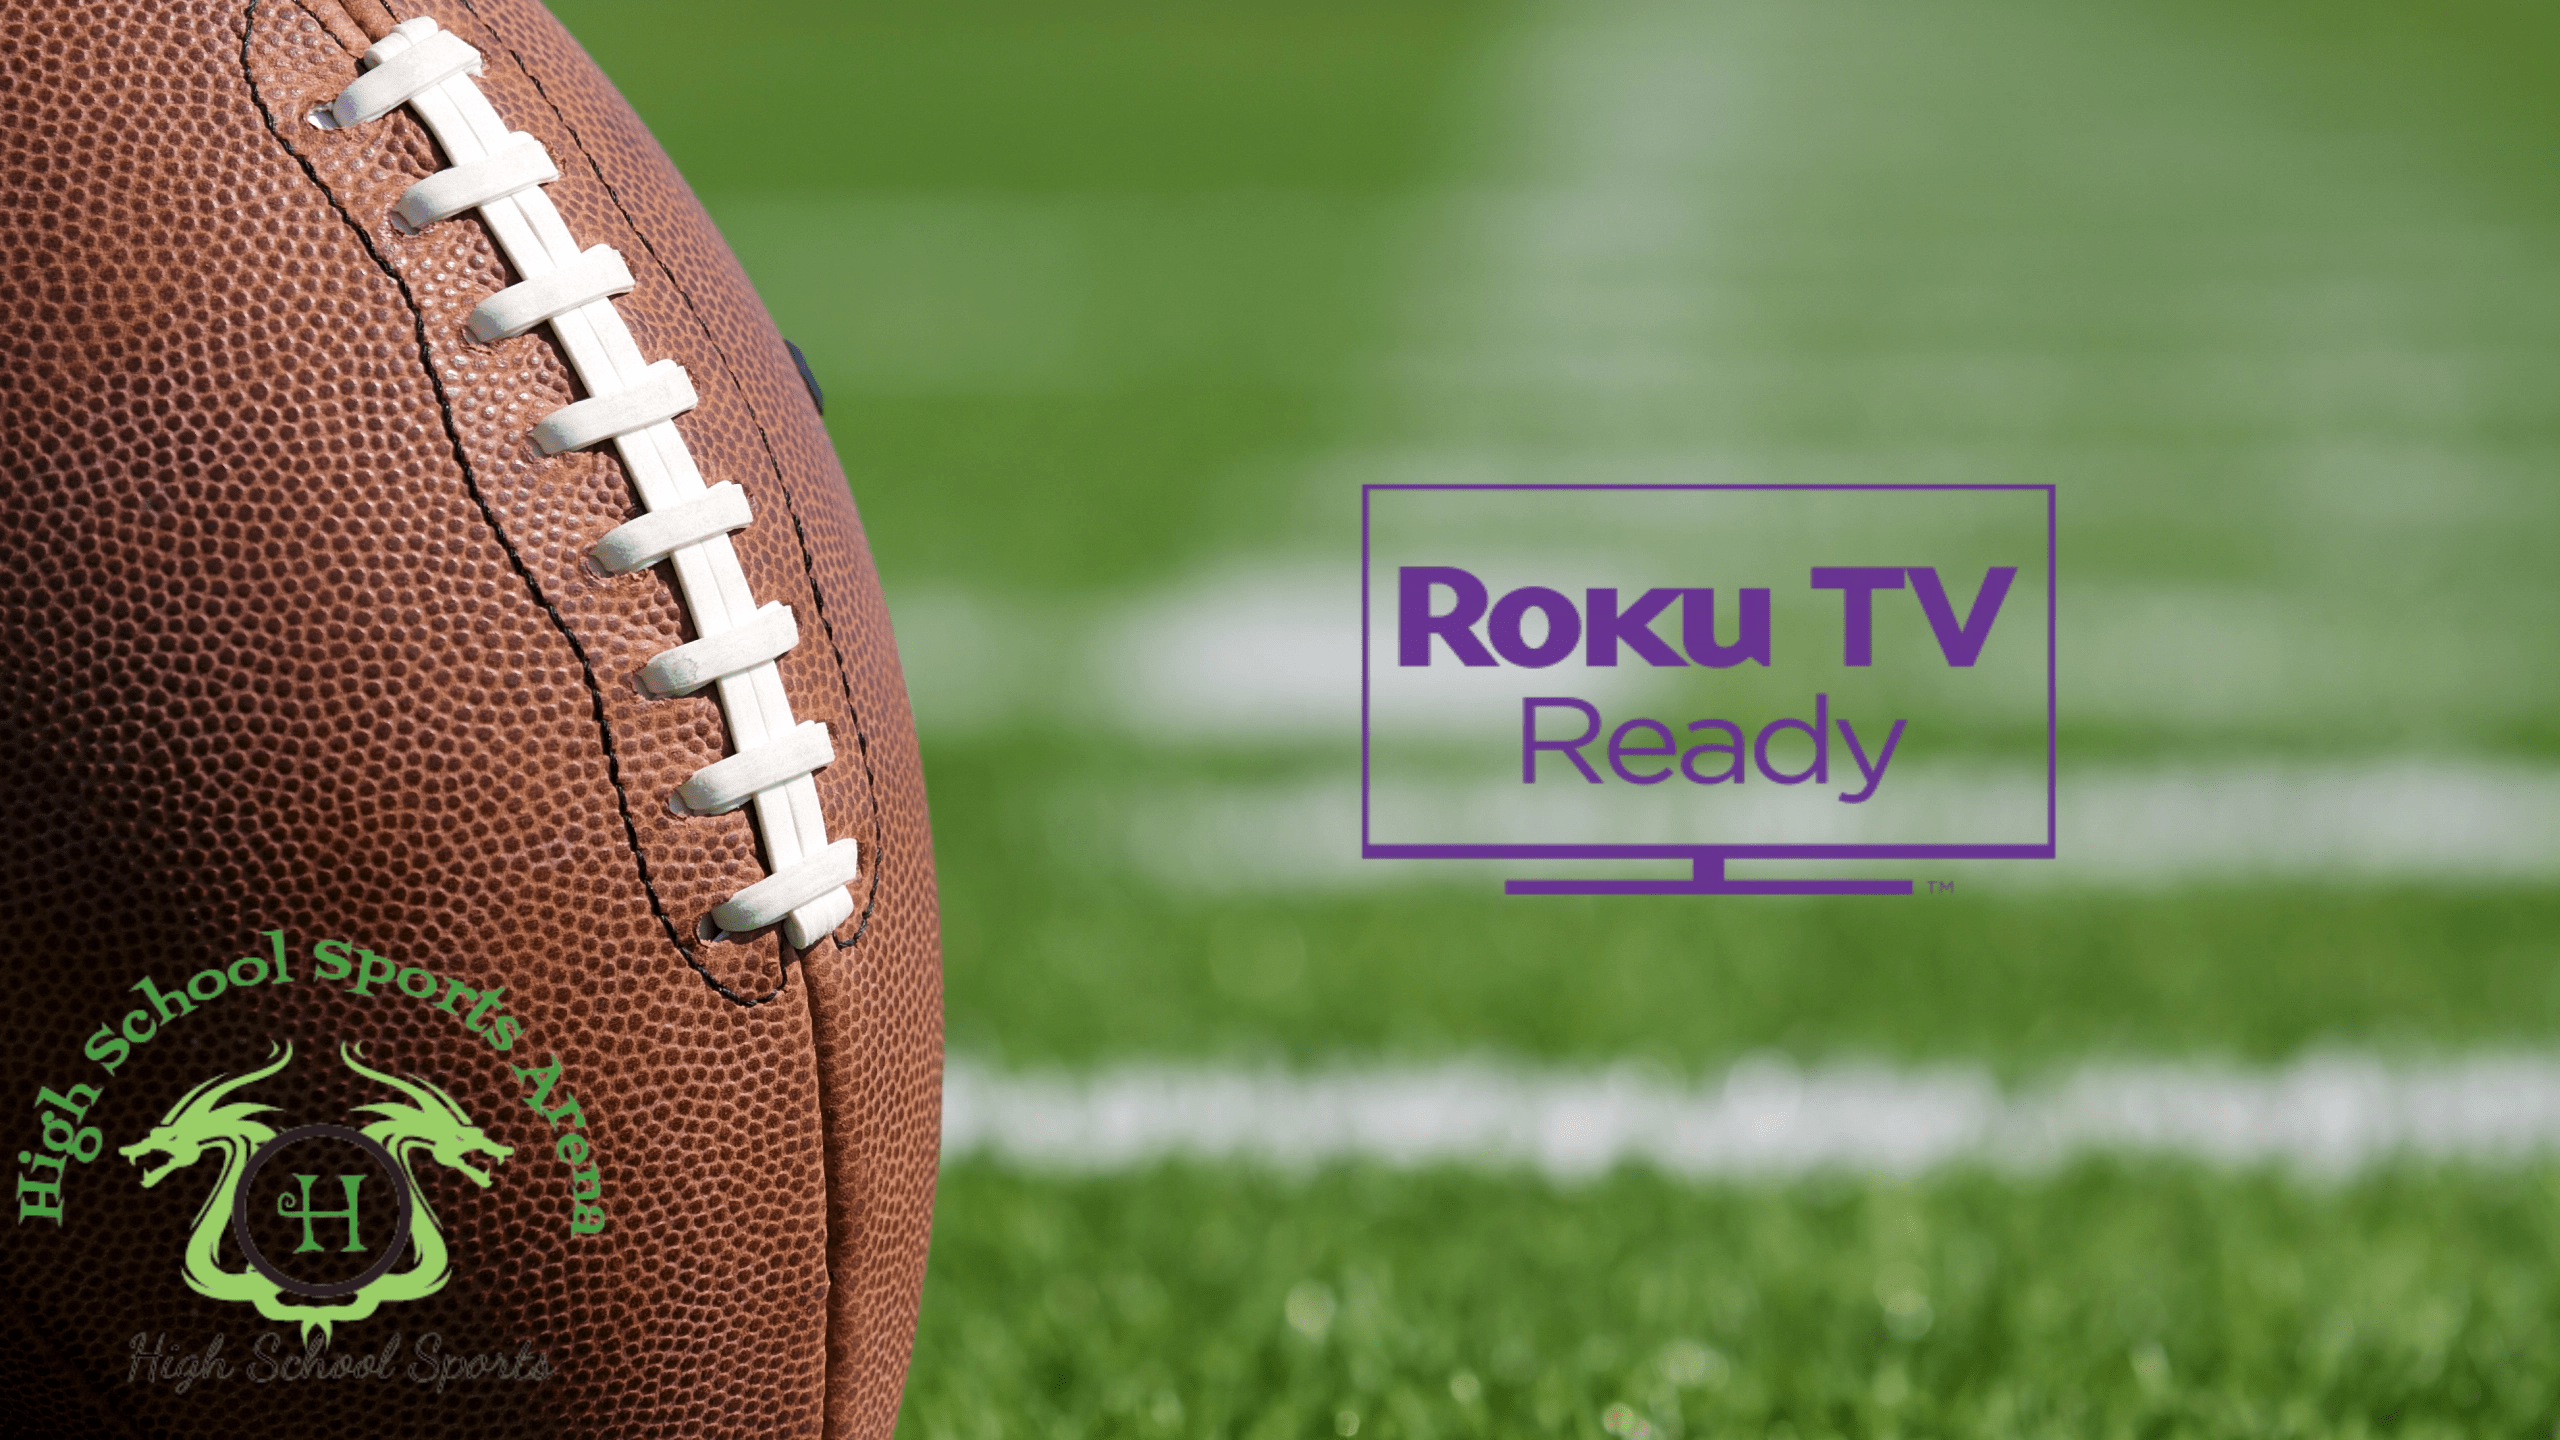 How to Watch High School Football on Roku: A Step-by-Step Guide